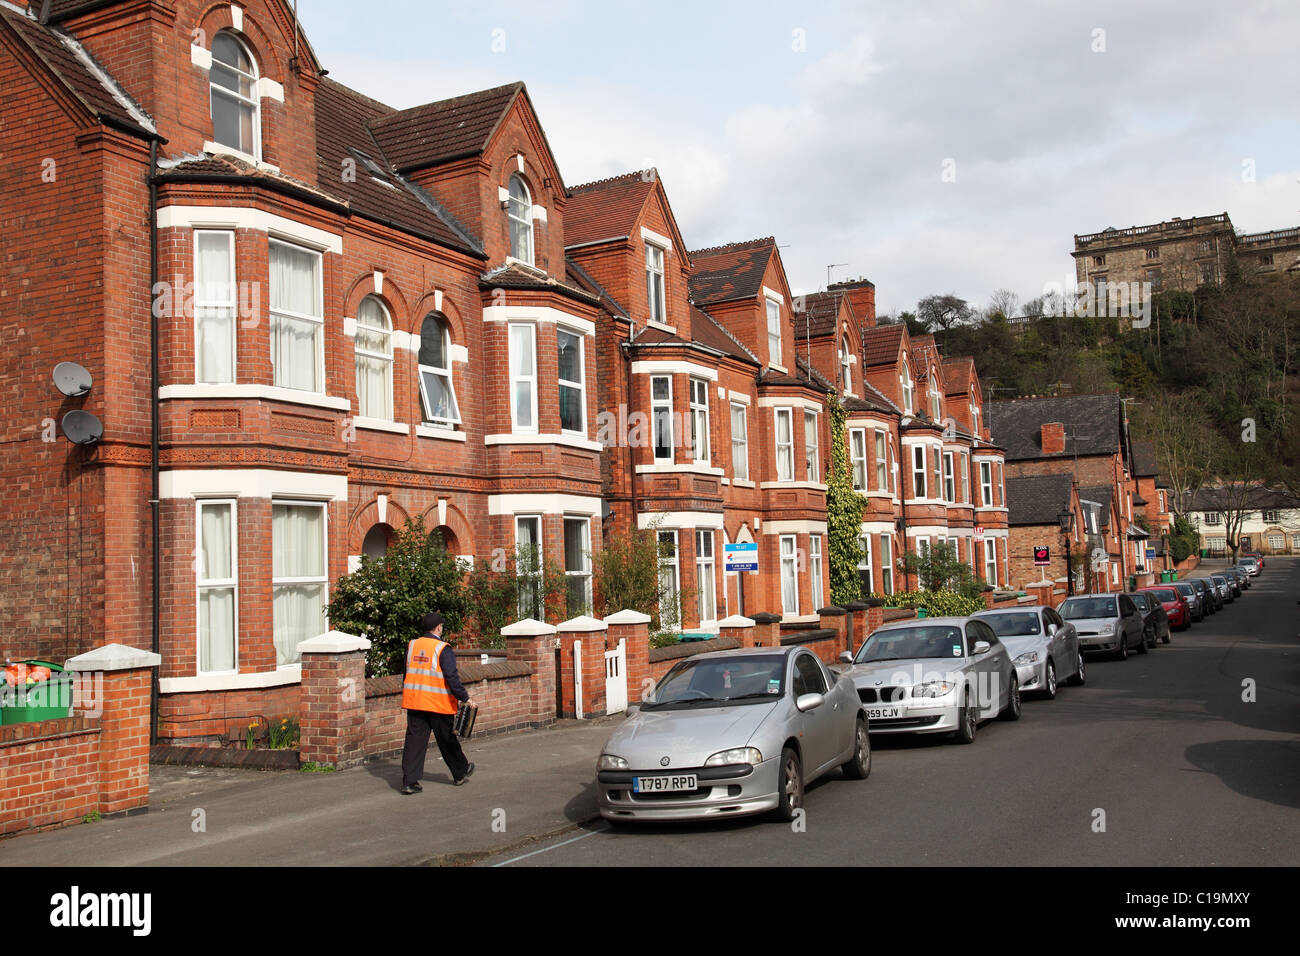 Homes on a residential street in the Park Estate, Nottingham, England, U.K. Stock Photo